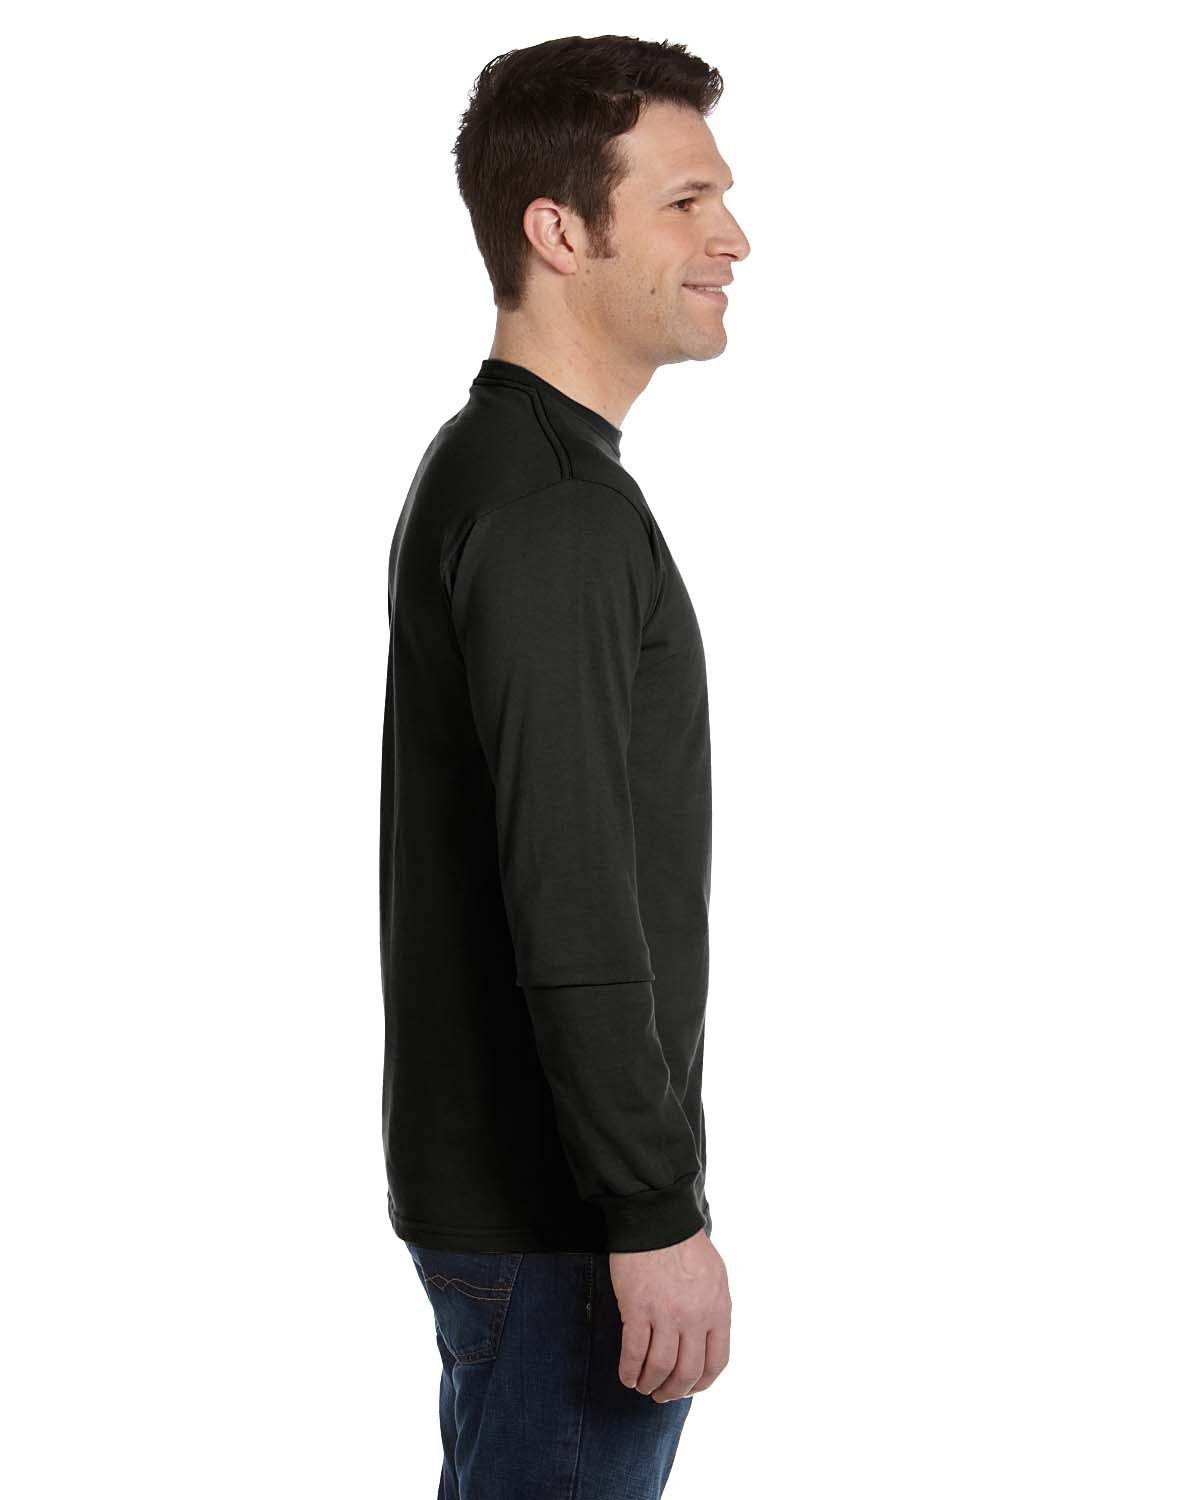 Long sleeves t-shirt with hood - Men's — Groupe Pronature